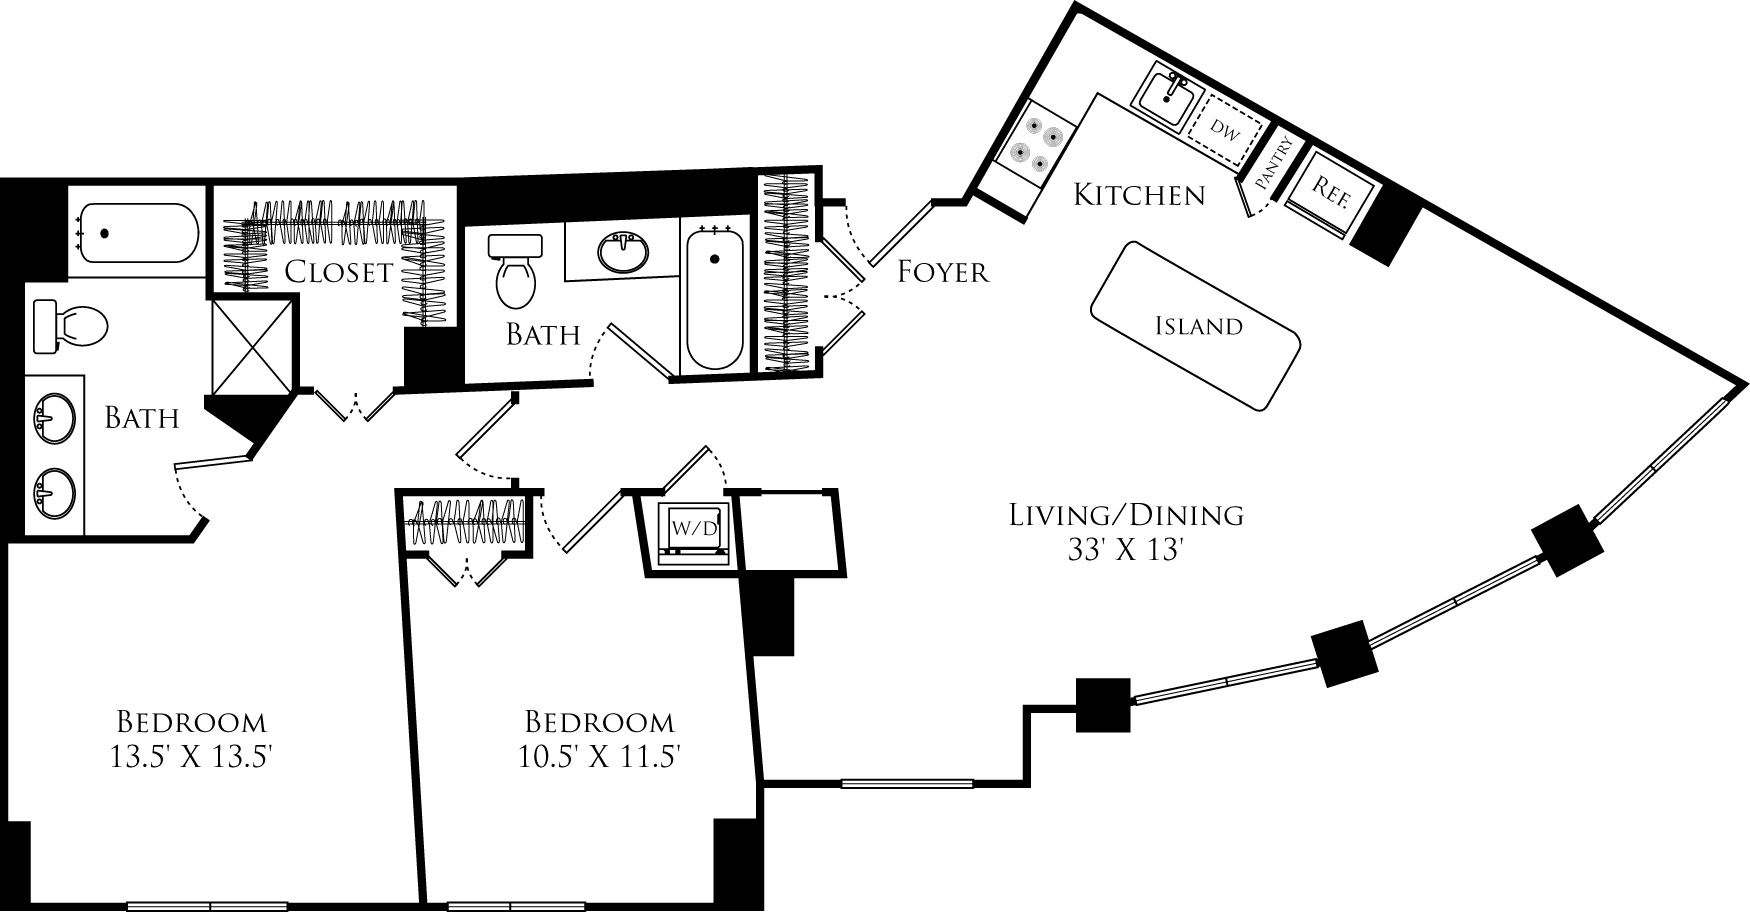 B2M floor plan with 2 beds, 2 baths and is 1188 square feet